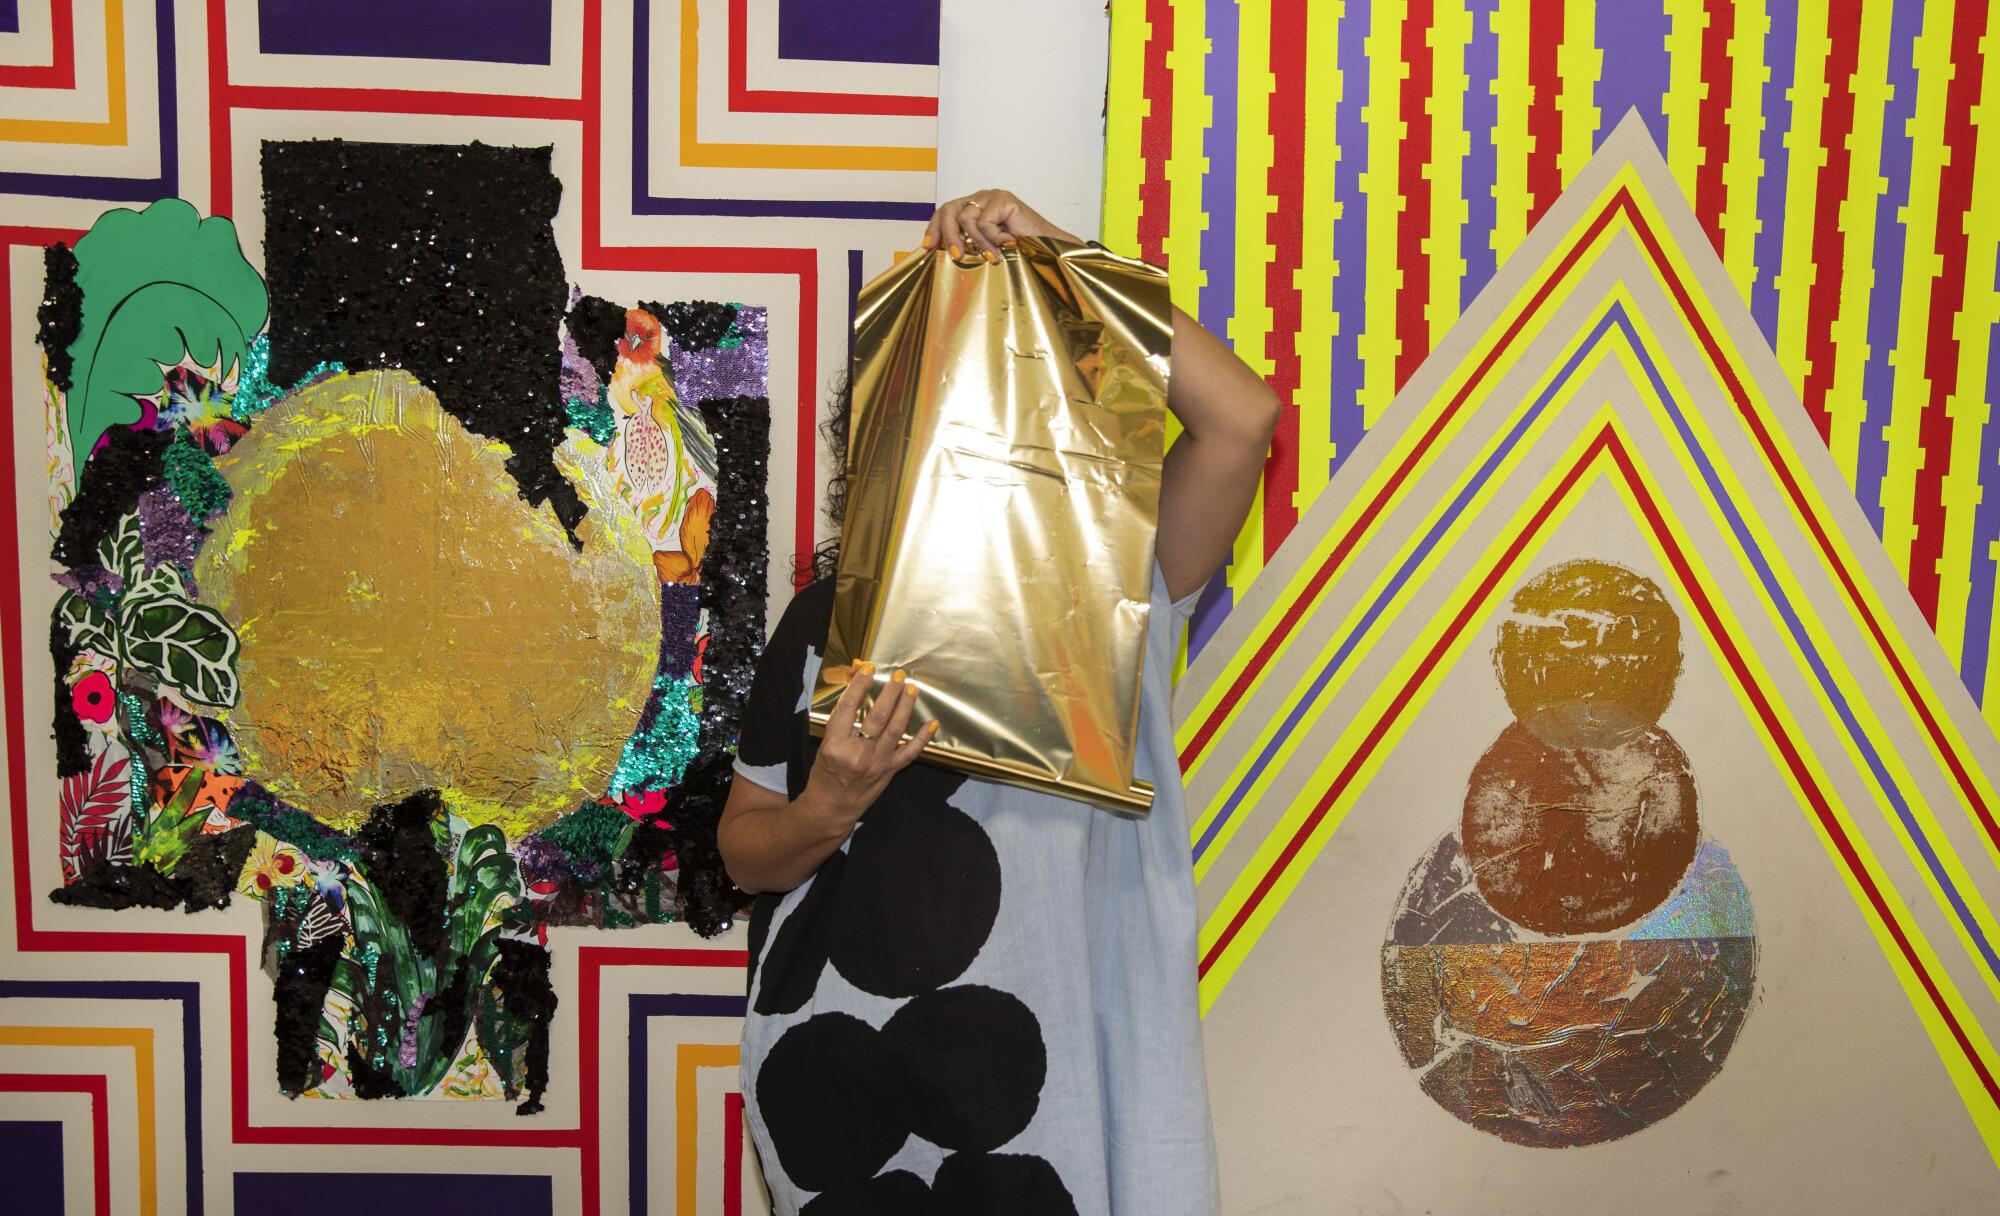 Carolyn Casta?o, in a gray and black dress, holds up a gold sheet in front of her face as she stands before paintings